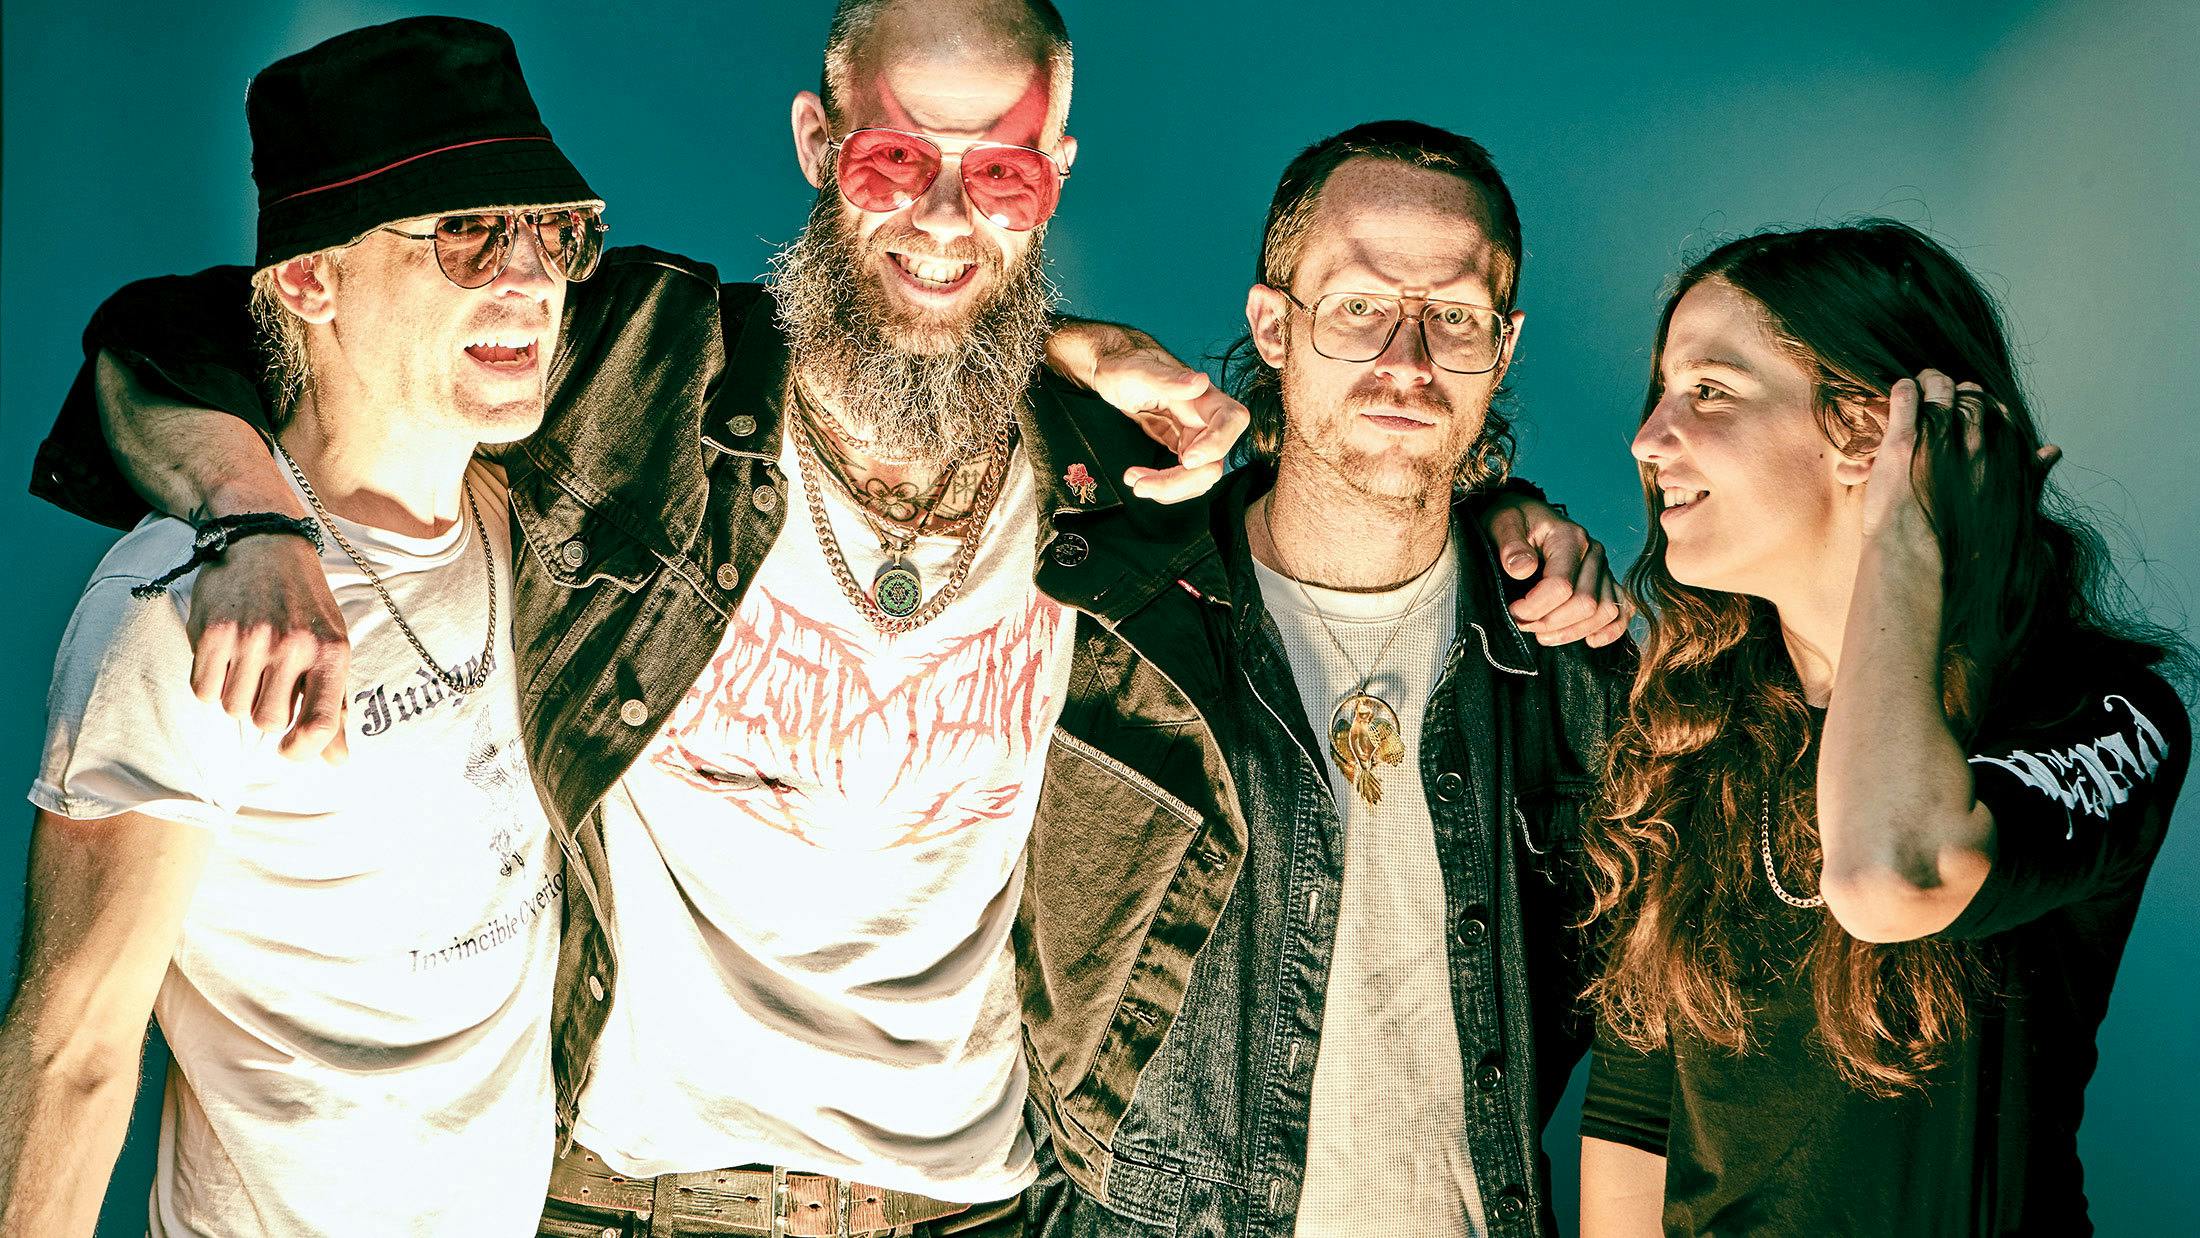 Baroness Are "Working Really Hard To Come Up With New Material And New Ideas"